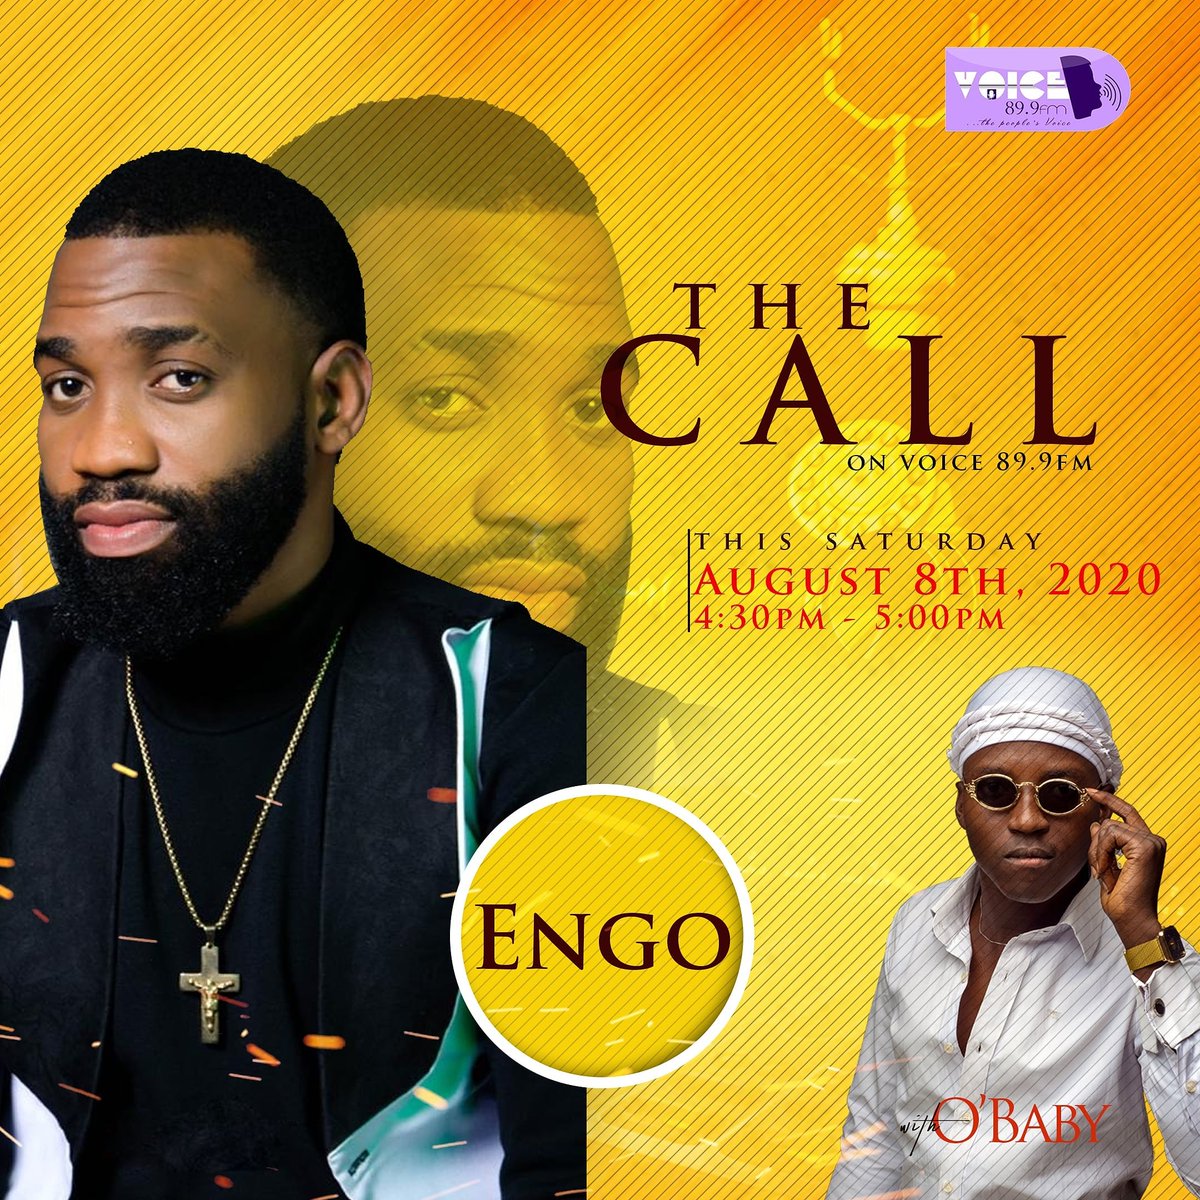 Meanwhile Everything  #BBnaija is trending, I got  #Thecallwithobaby UPDATES for you ere. Happy Sunday ma People! it's a beautiful day. Weeks ago on Ado-Ekiti's  @Voicefm899 Obaby put on live call A phenomenal Gospel Rapper  @engocbe. STAY LOCKED. https://twitter.com/Solohtolz/status/1292152447134248969?s=20